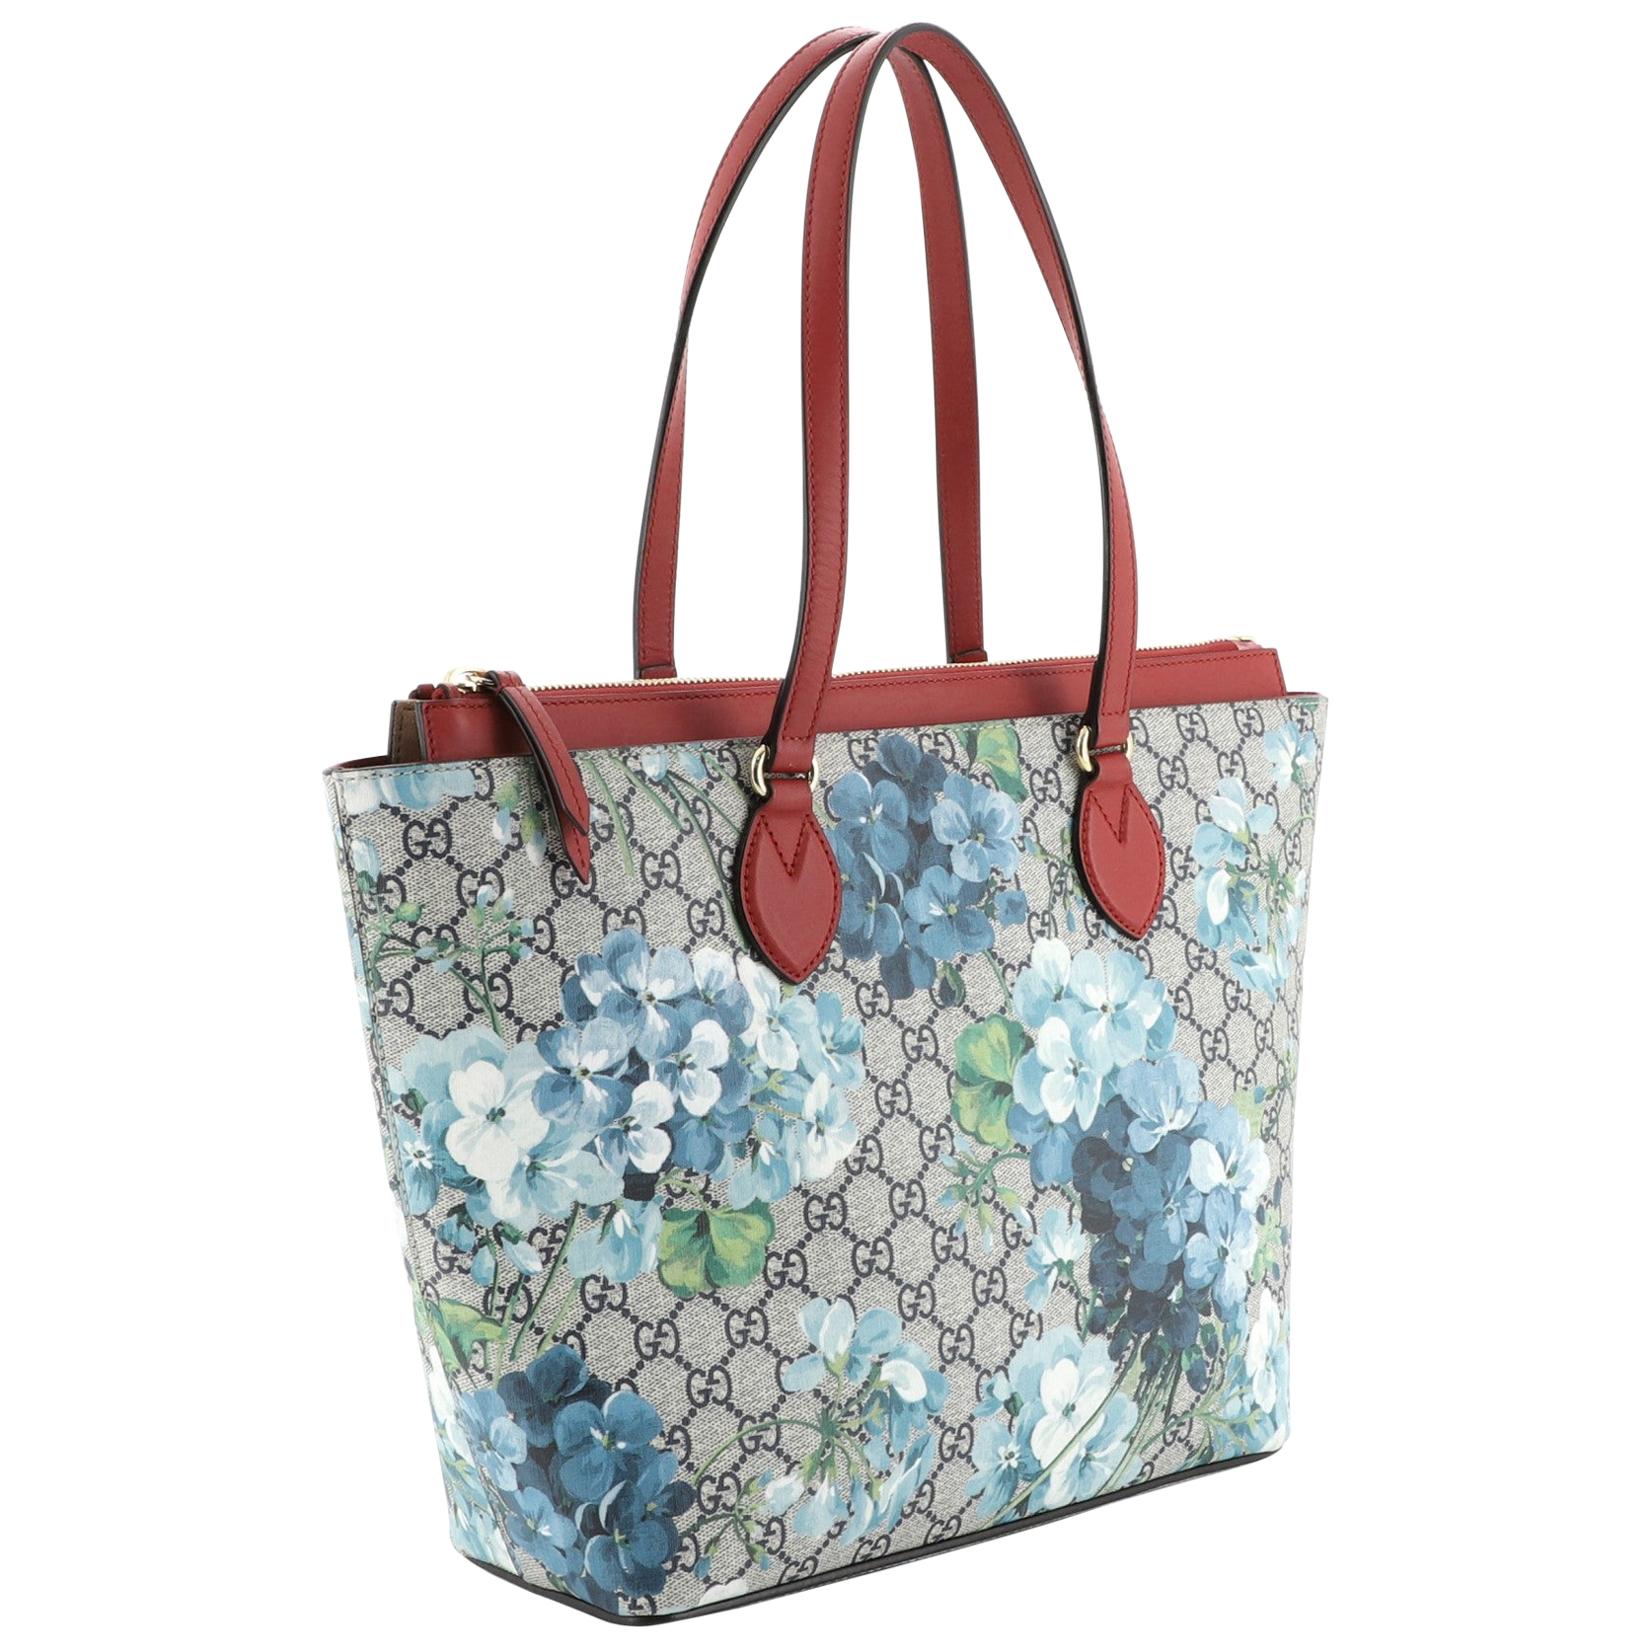 Linea A Zip Tote Blooms Print GG Coated Canvas Medium